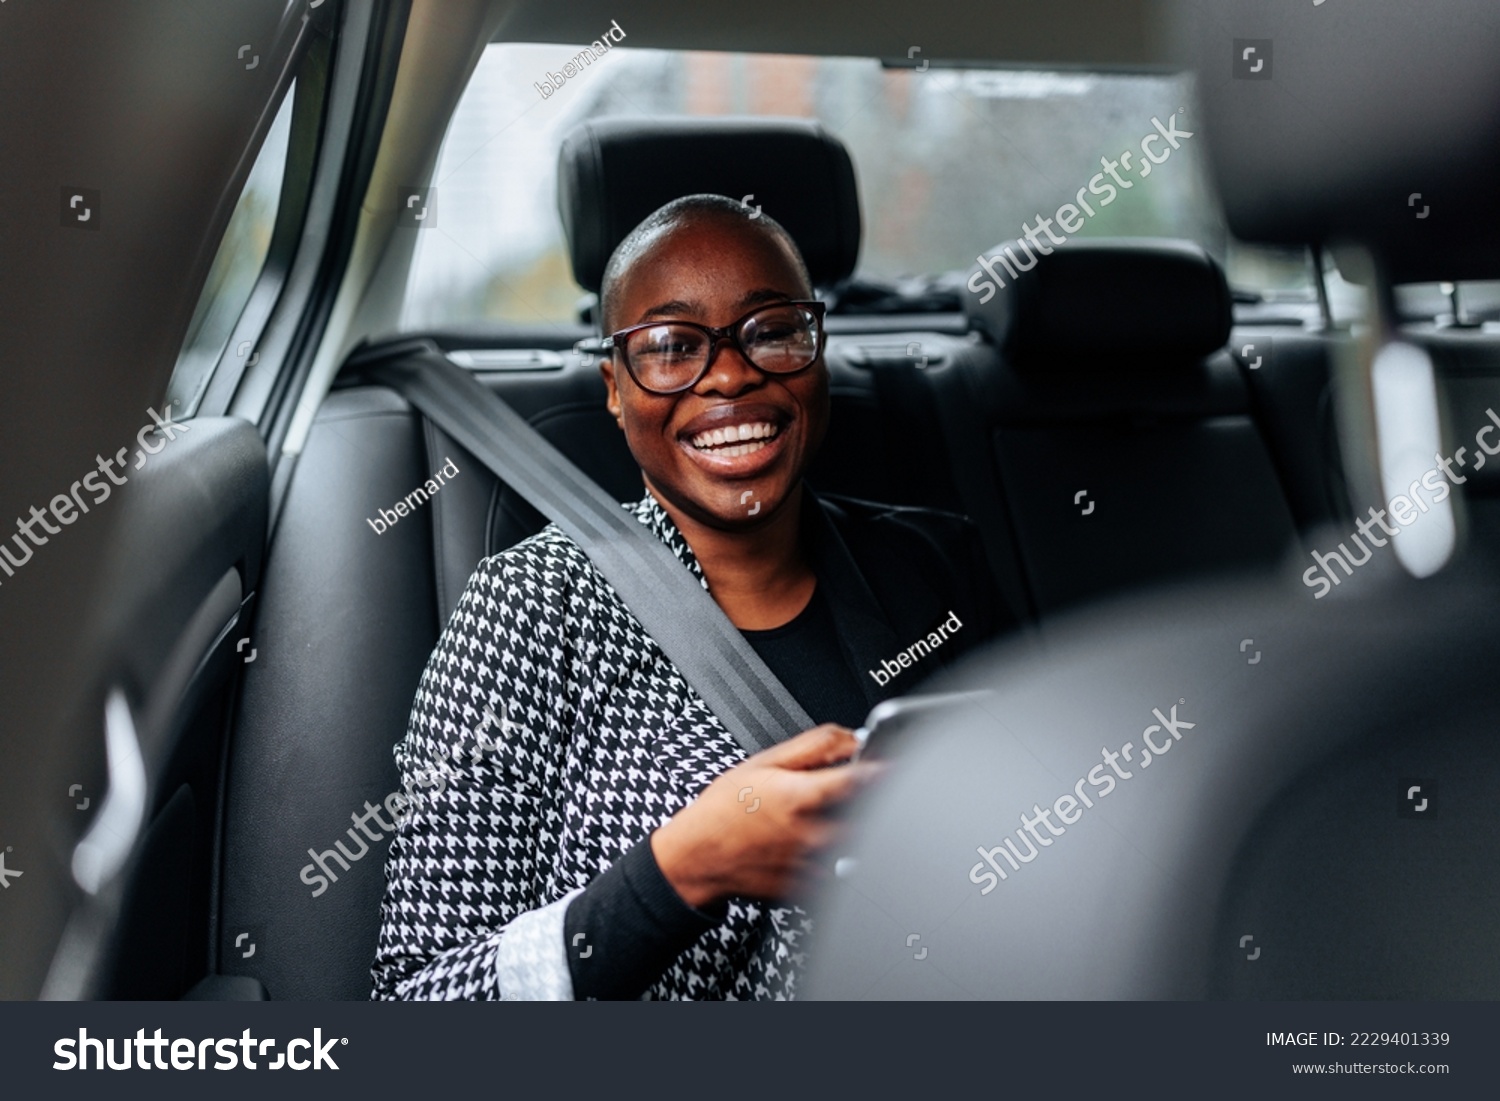 A cheerful African American woman is in the car on the backseat using her smartphone and looking at the camera. #2229401339